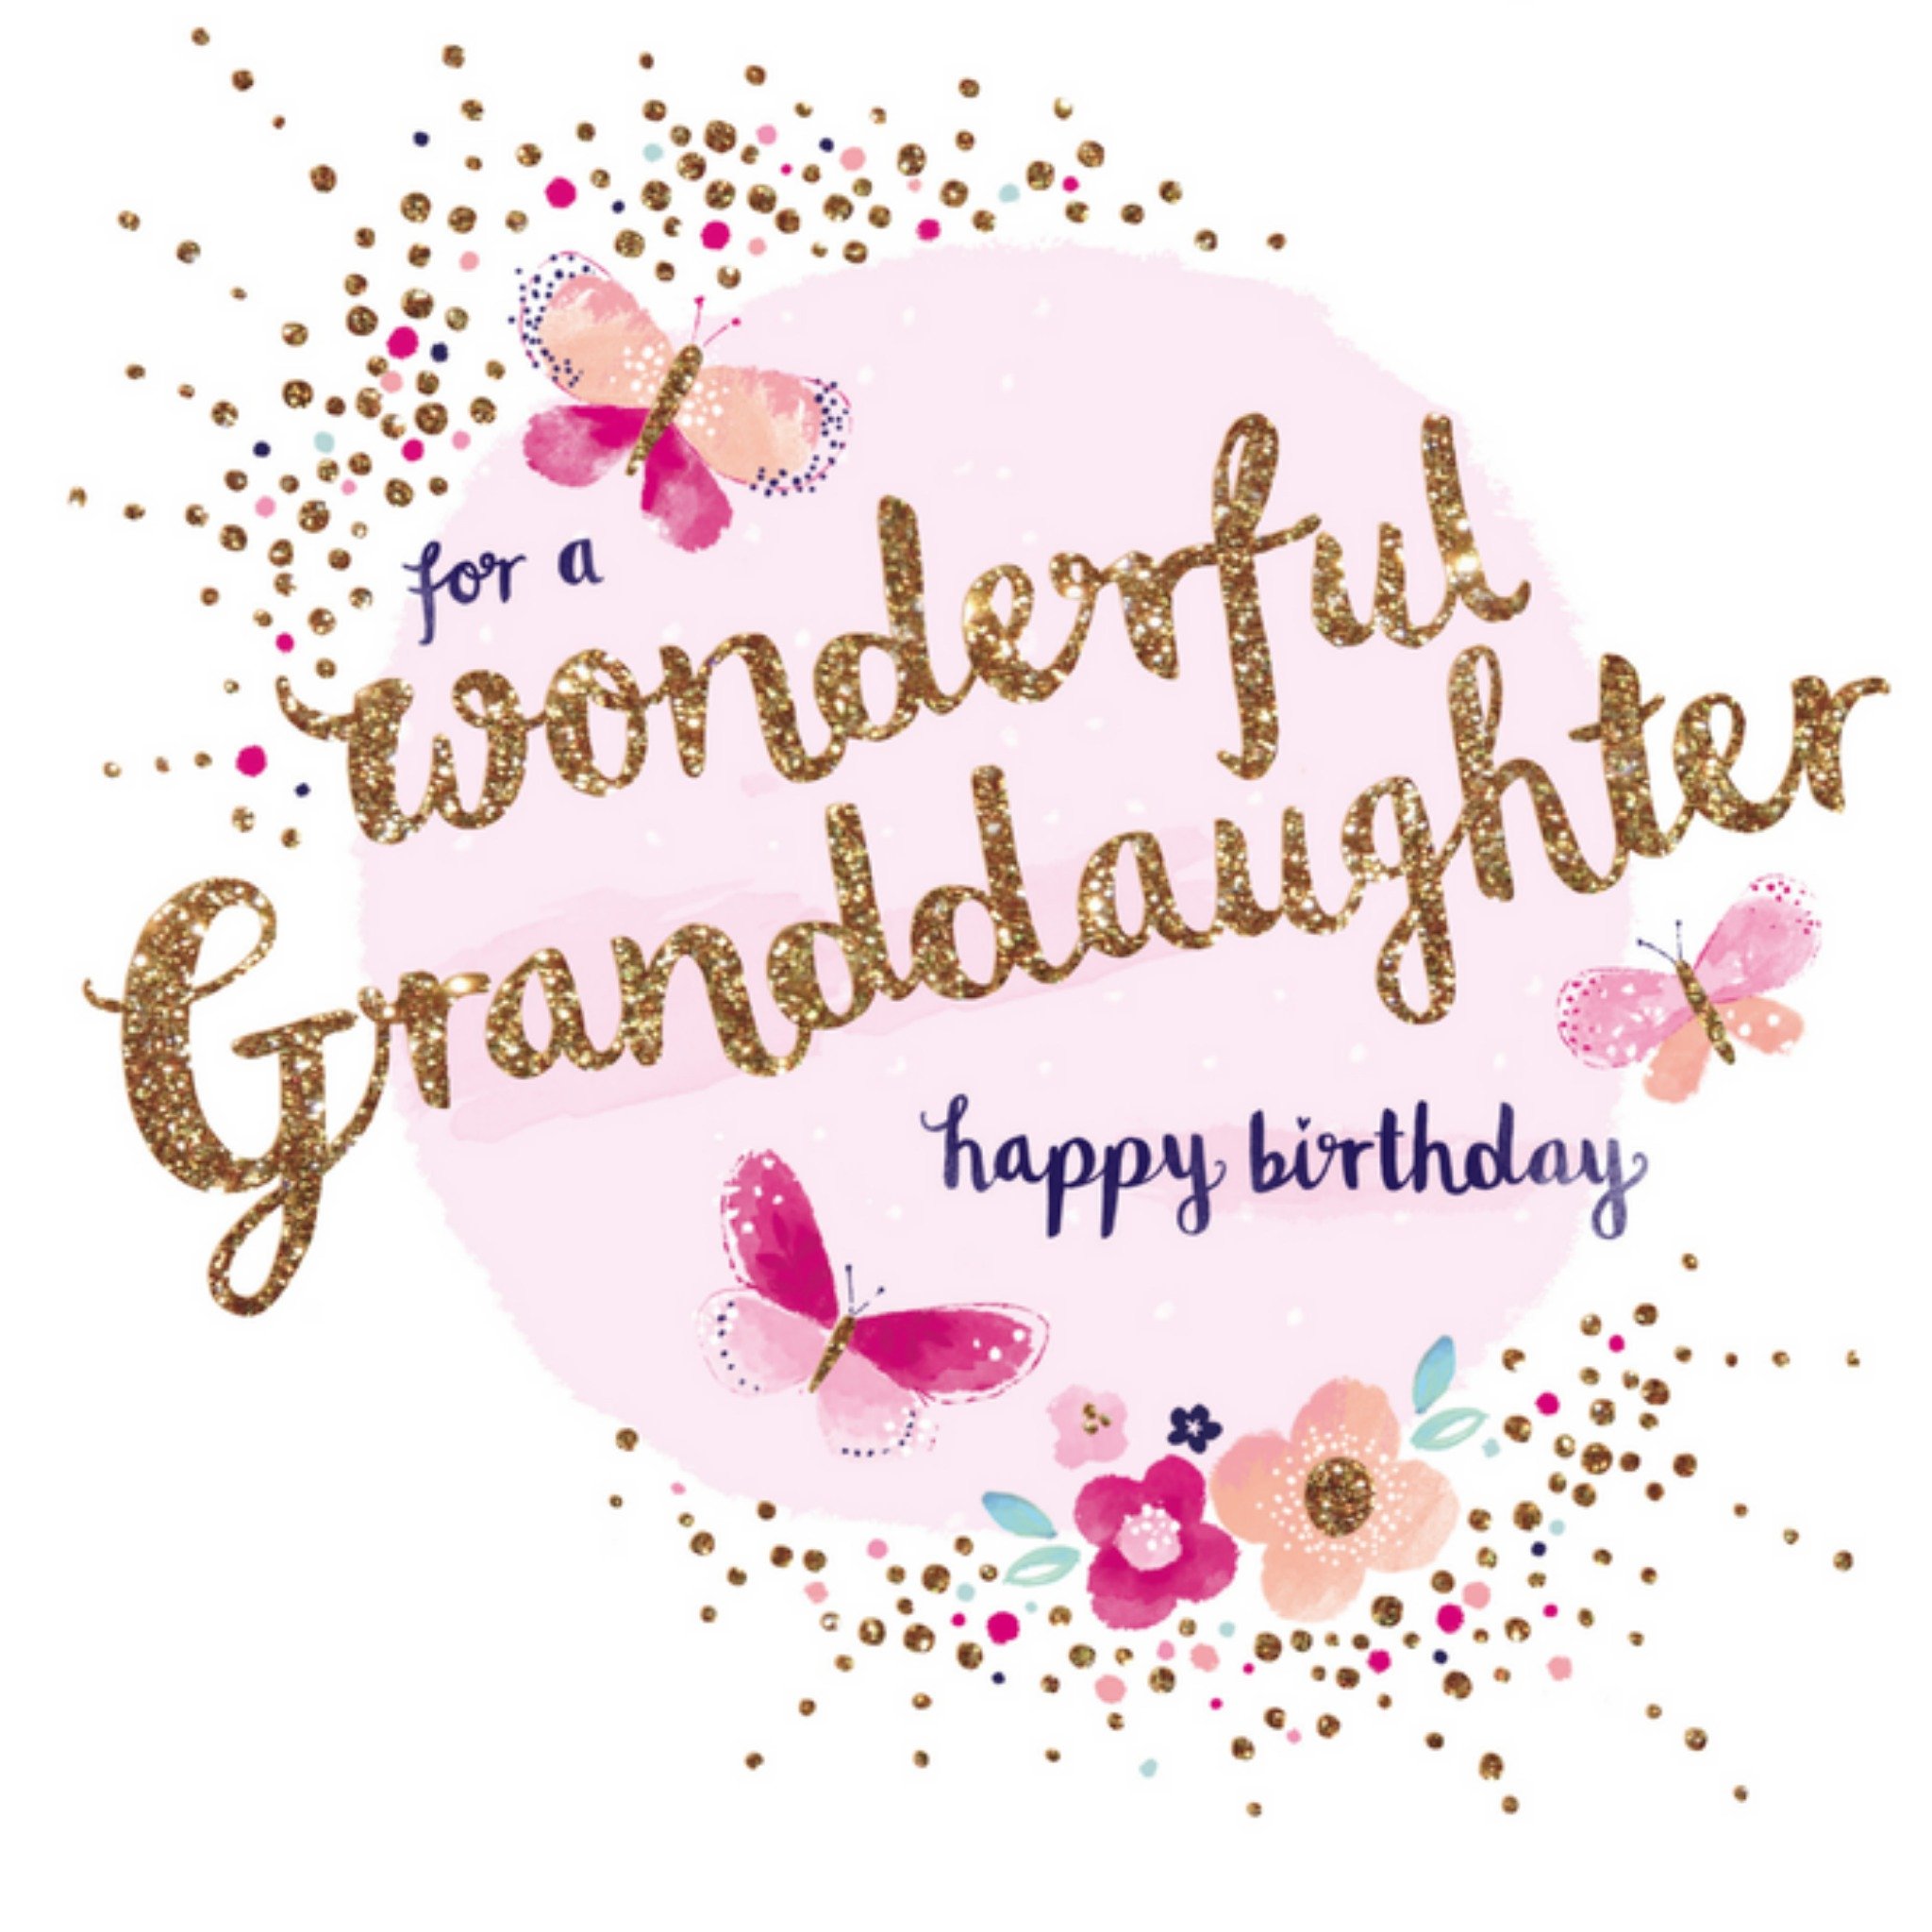 For a wonderful granddaughter